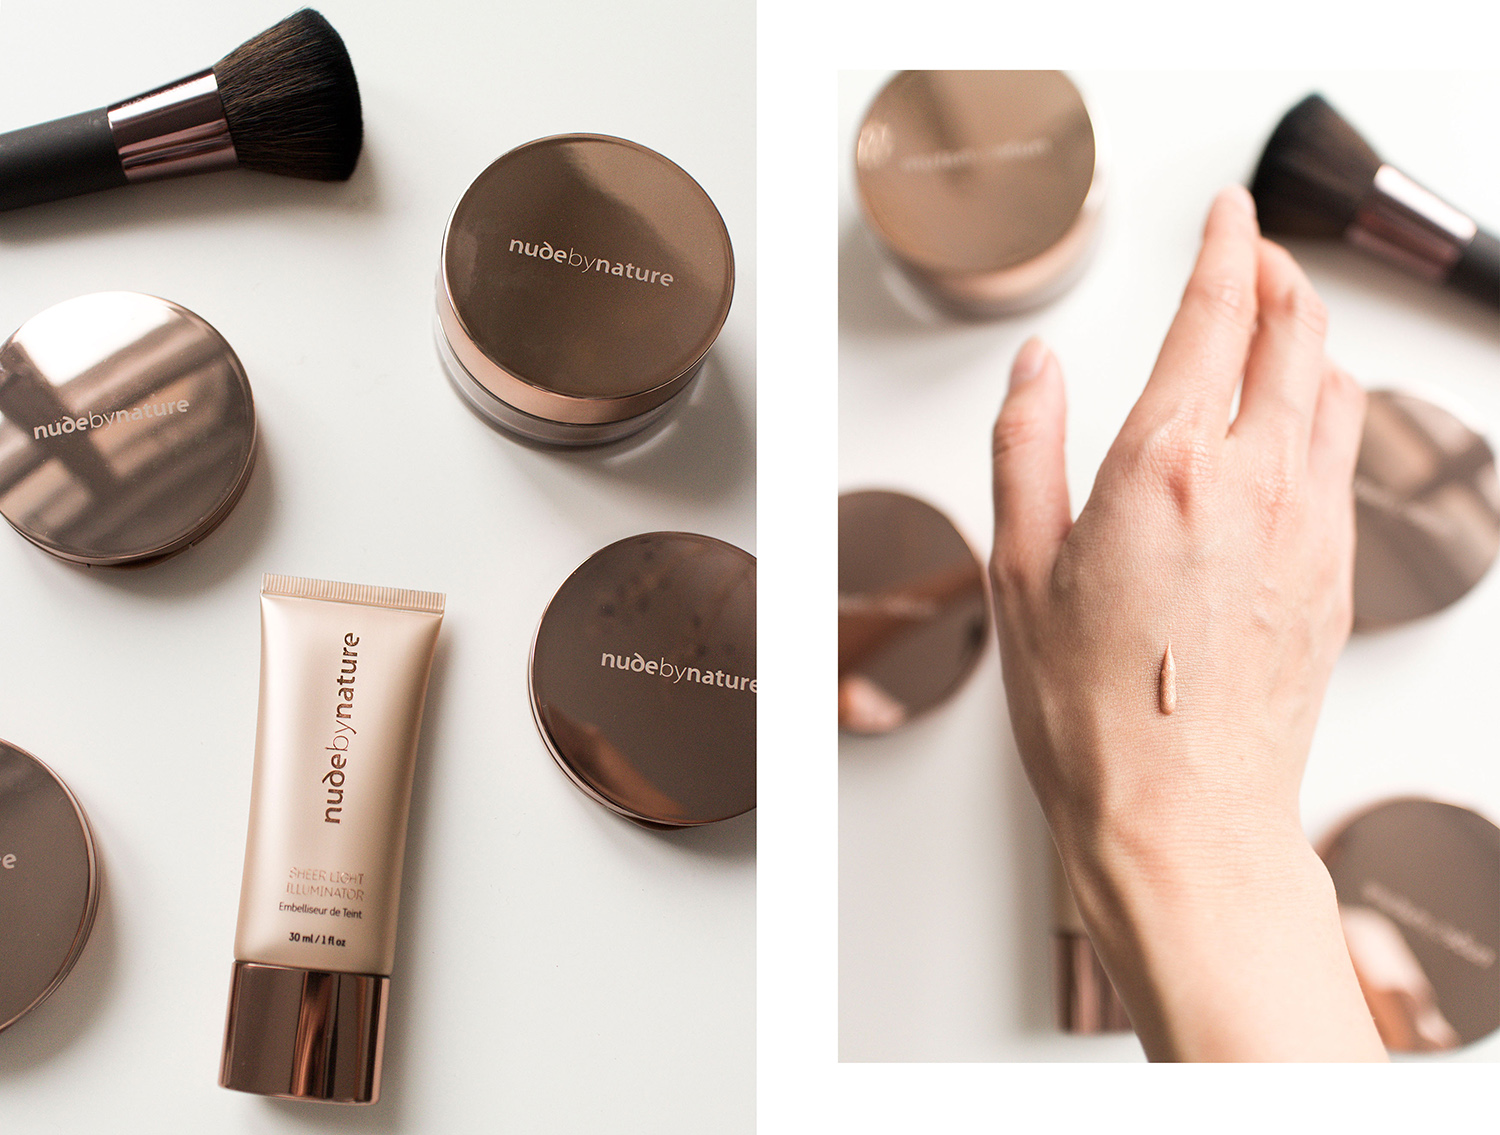 Nude by Nature Christmas Collection Set Review: Sheer Light Illuminator 